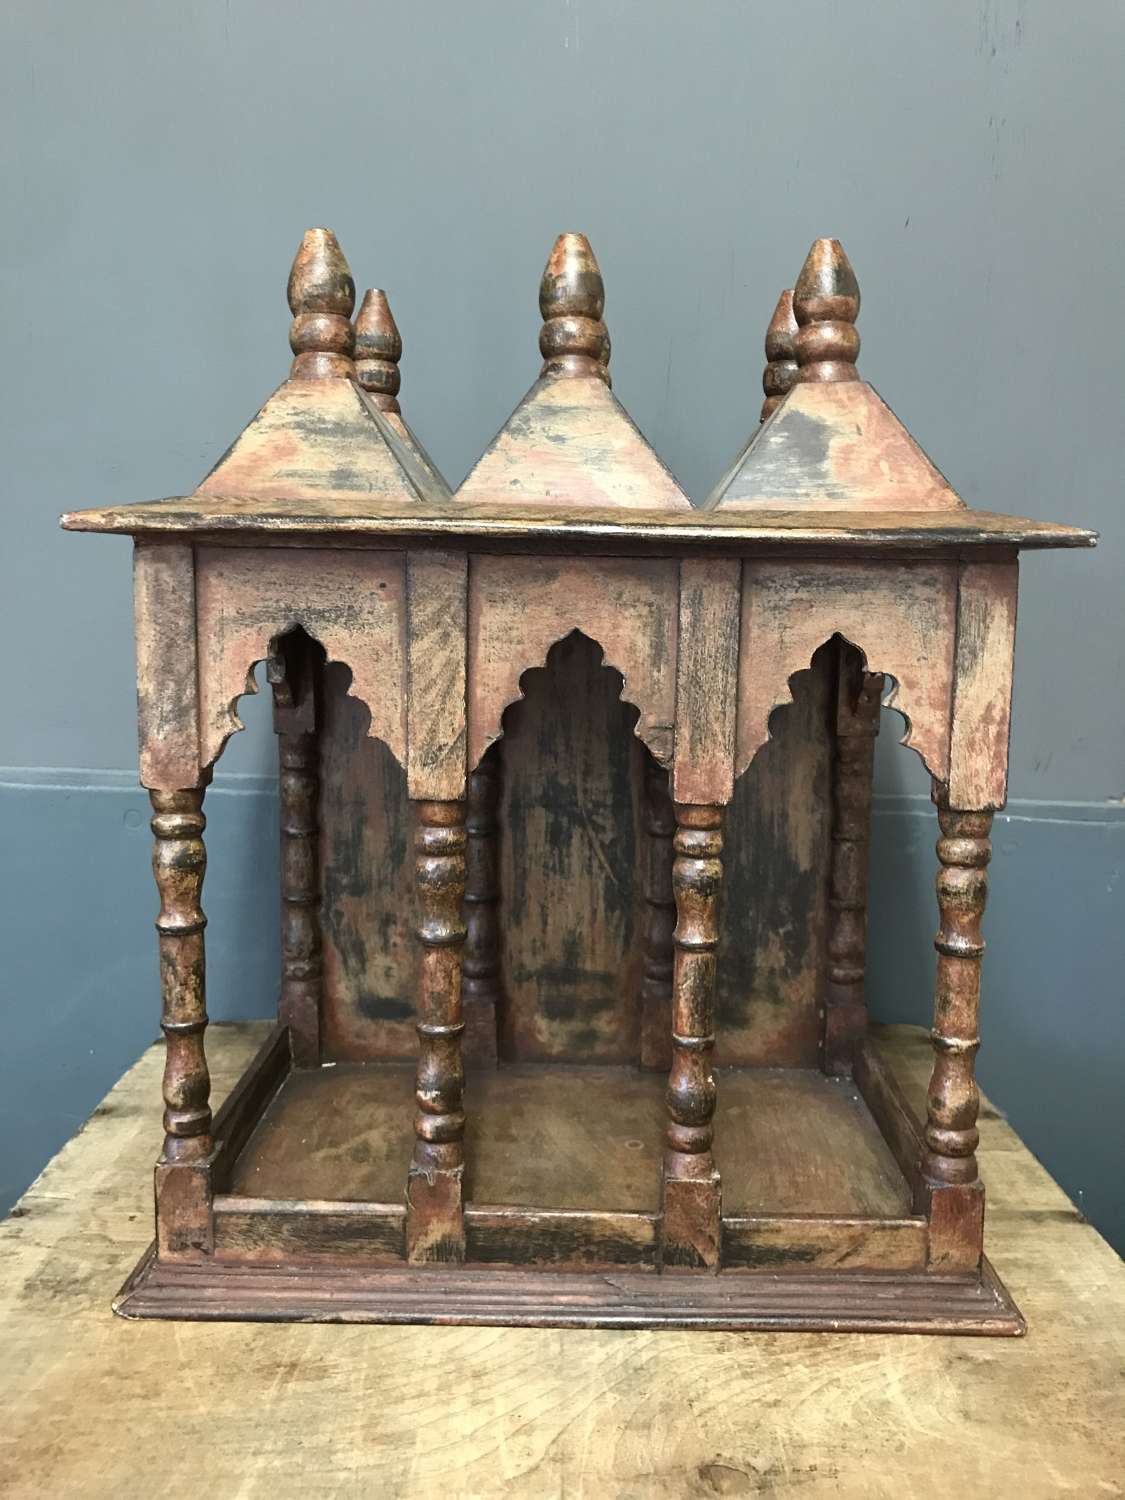 Wooden model of an Indian Temple